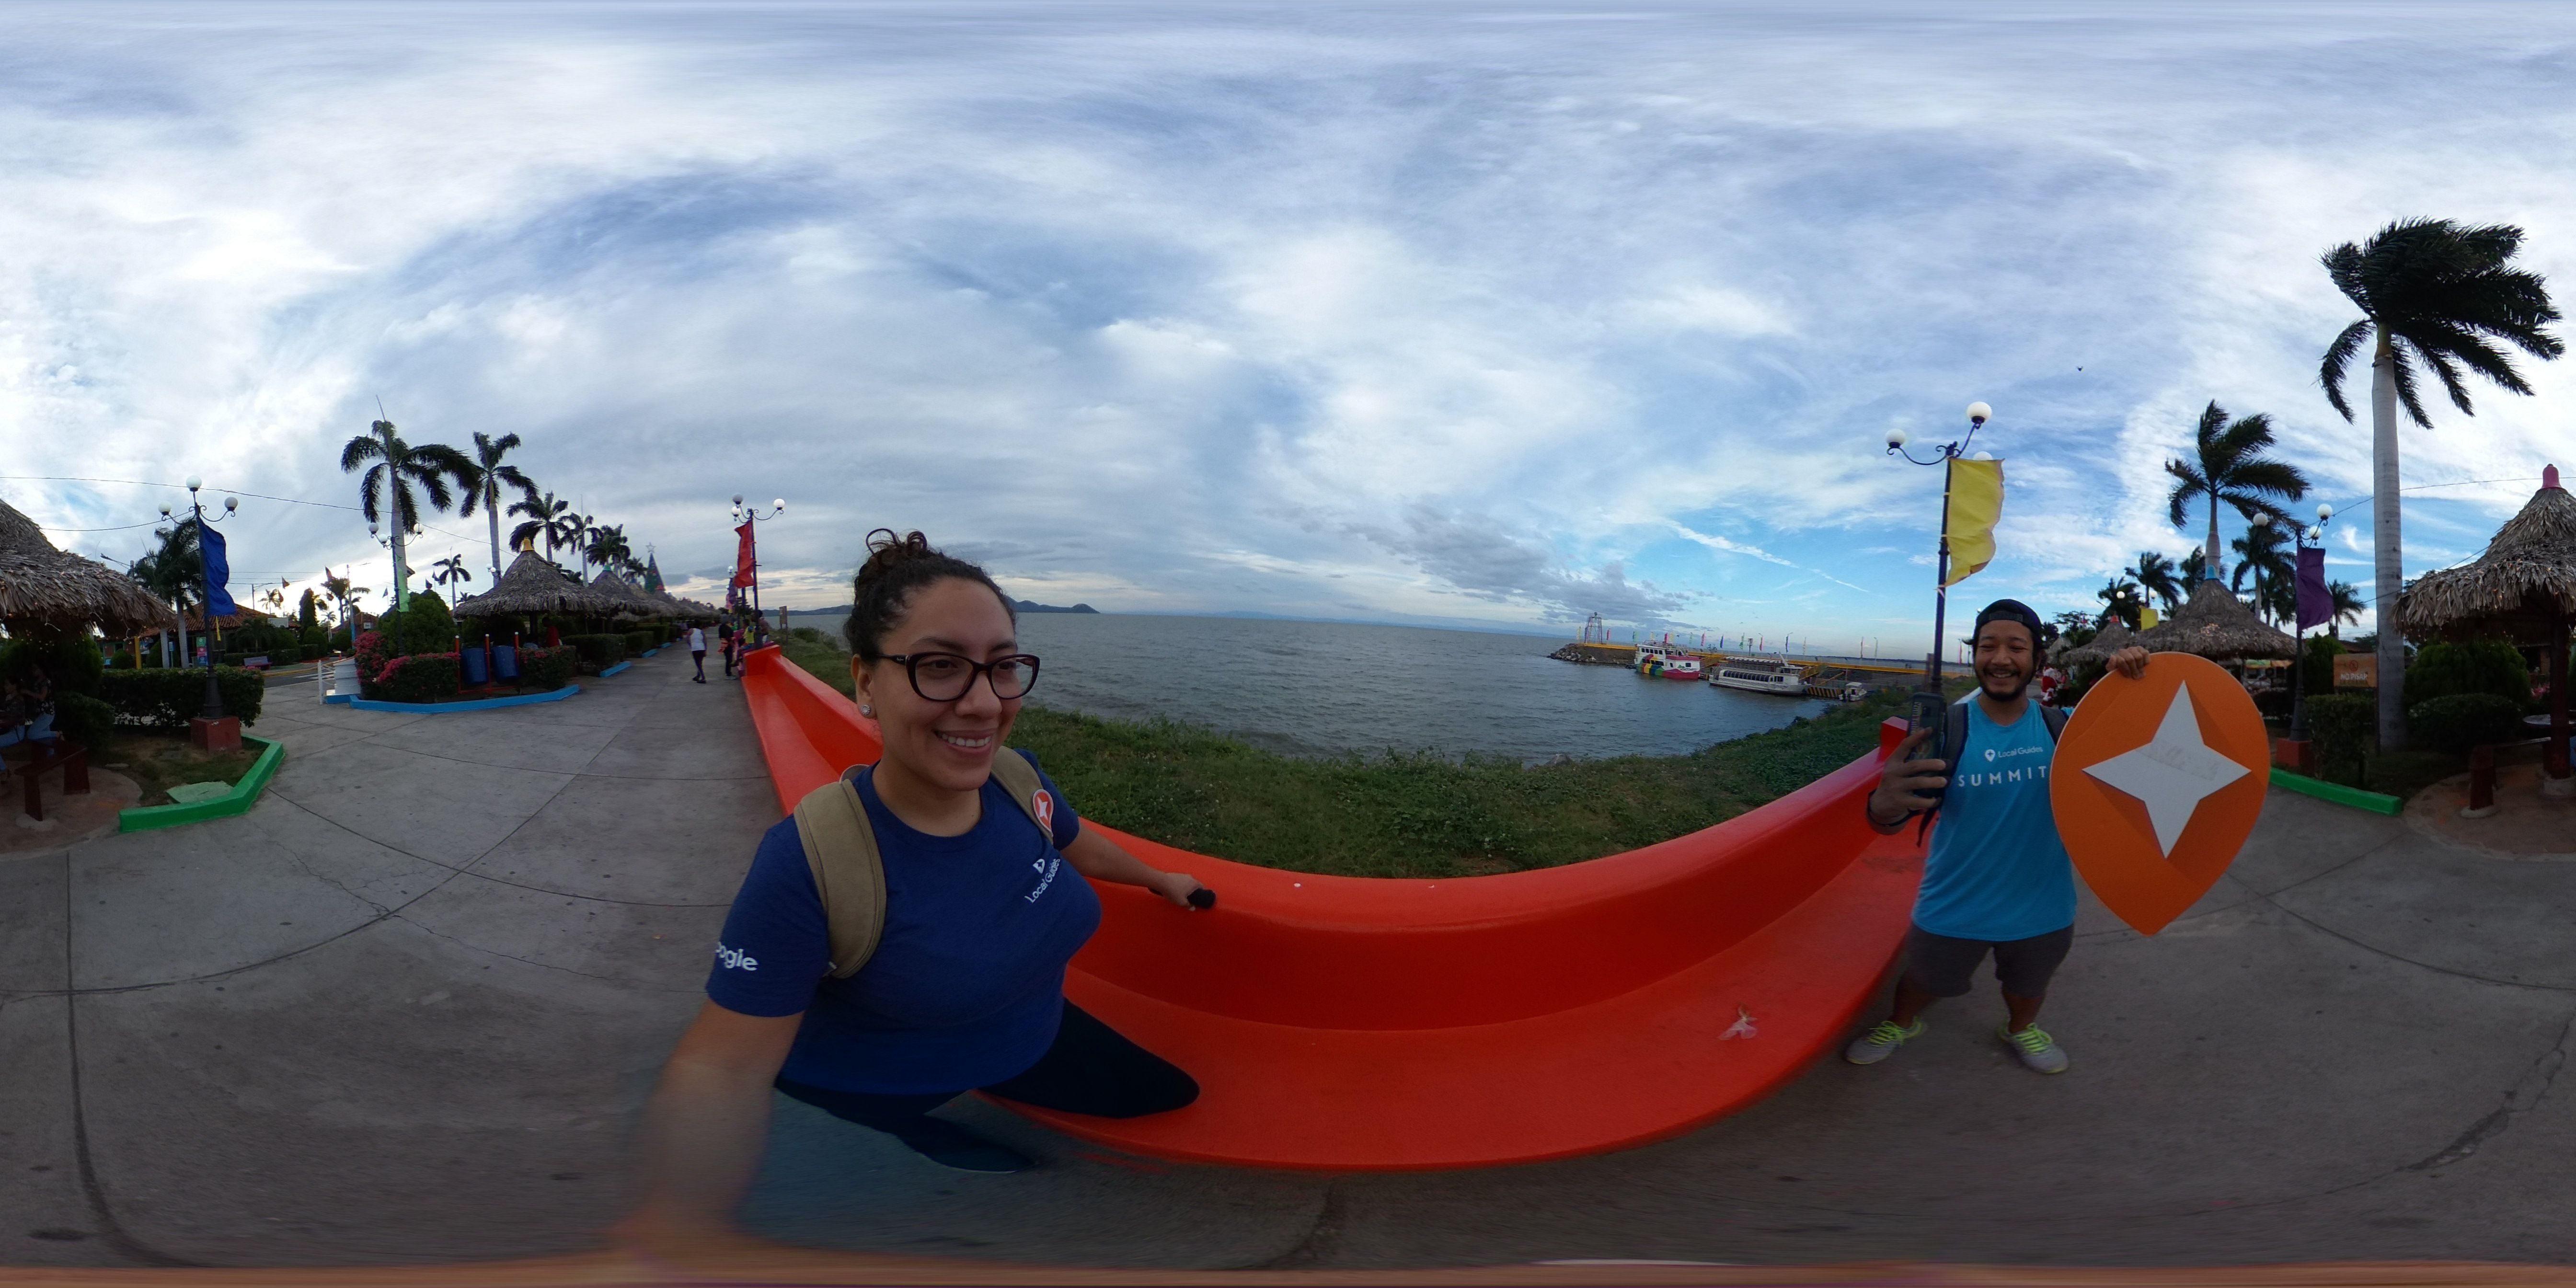 360 Photo by the Lakeside